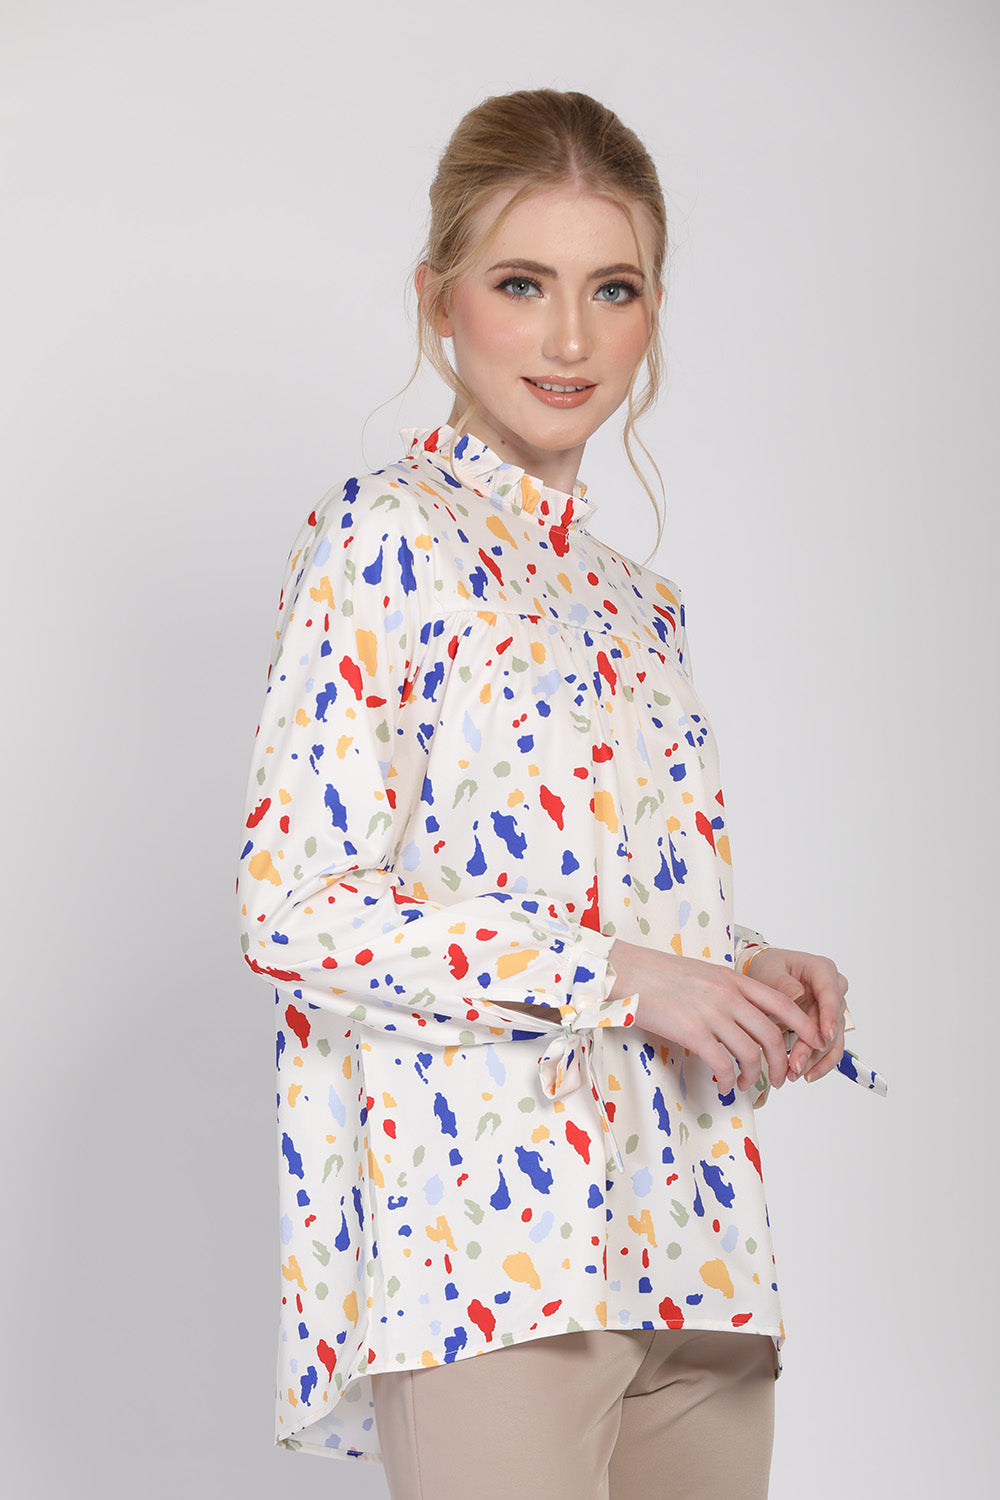 The Ceria Blouse in Brush Paints